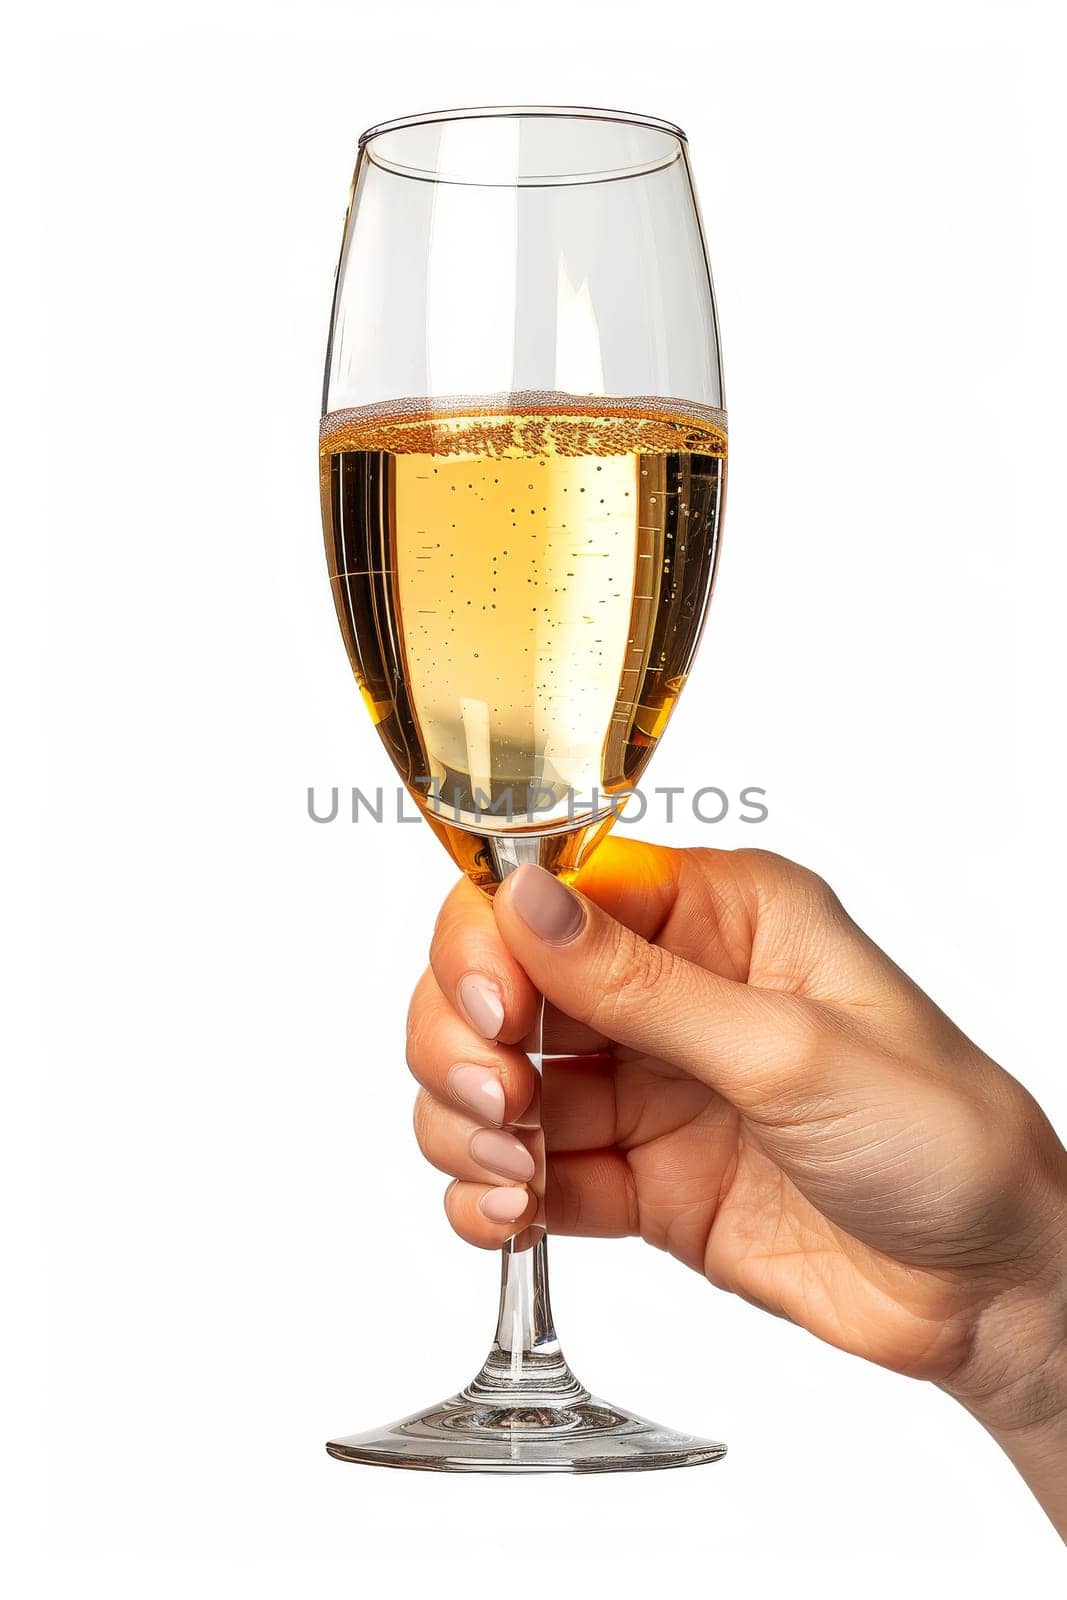 Champagne glasses, toasting to a special occasion.